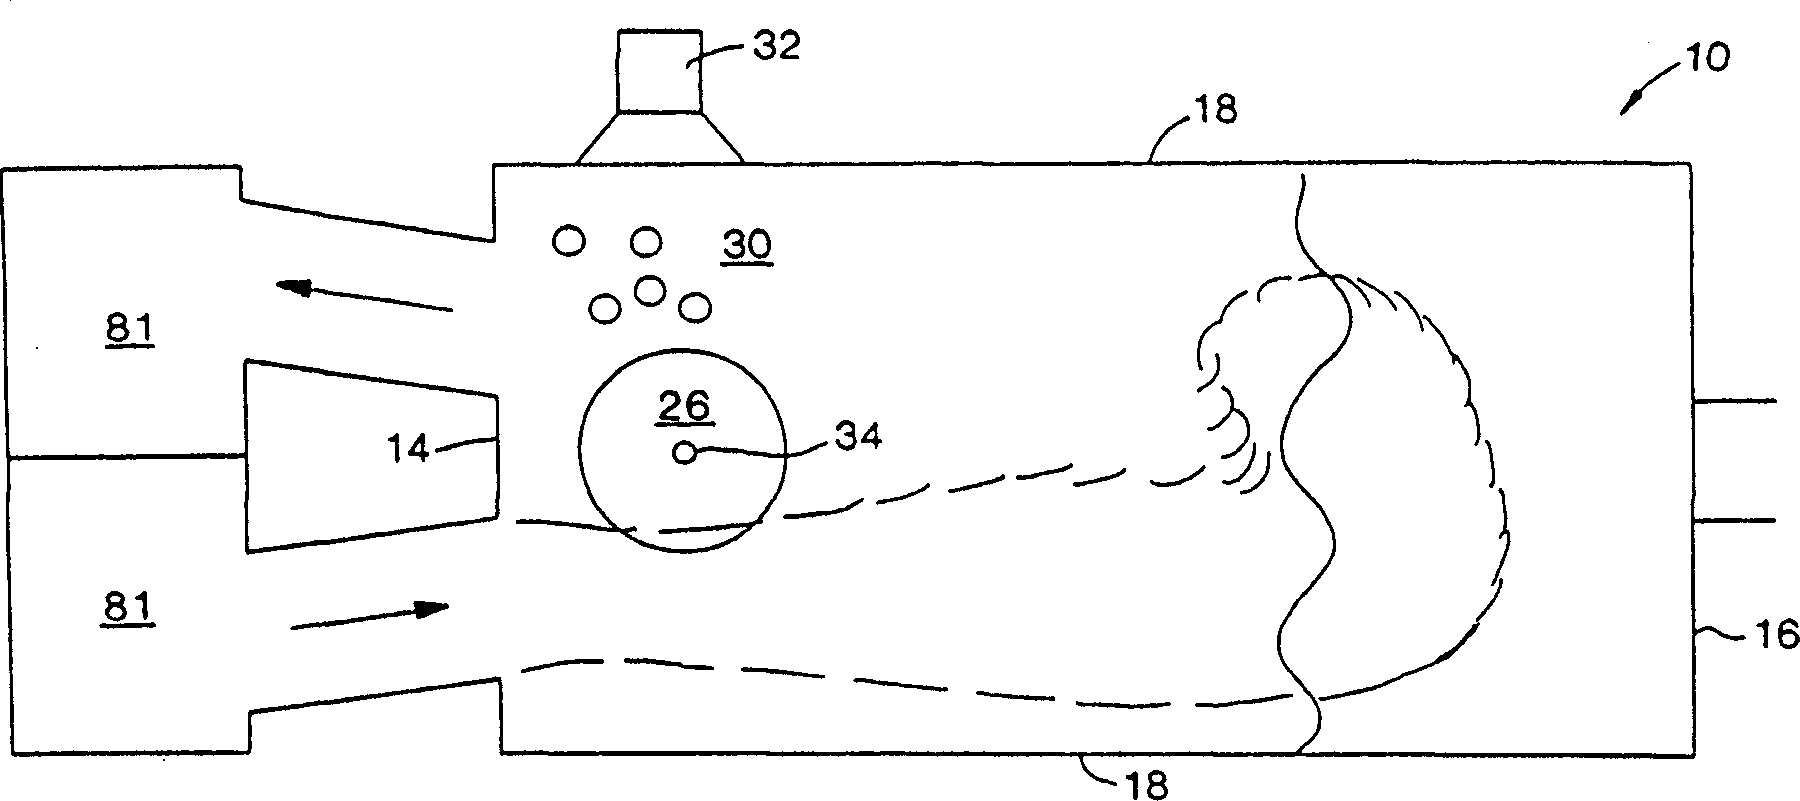 Method for heating glass melting furnace with sectional combustion oxygen fuel burner mounted on the top